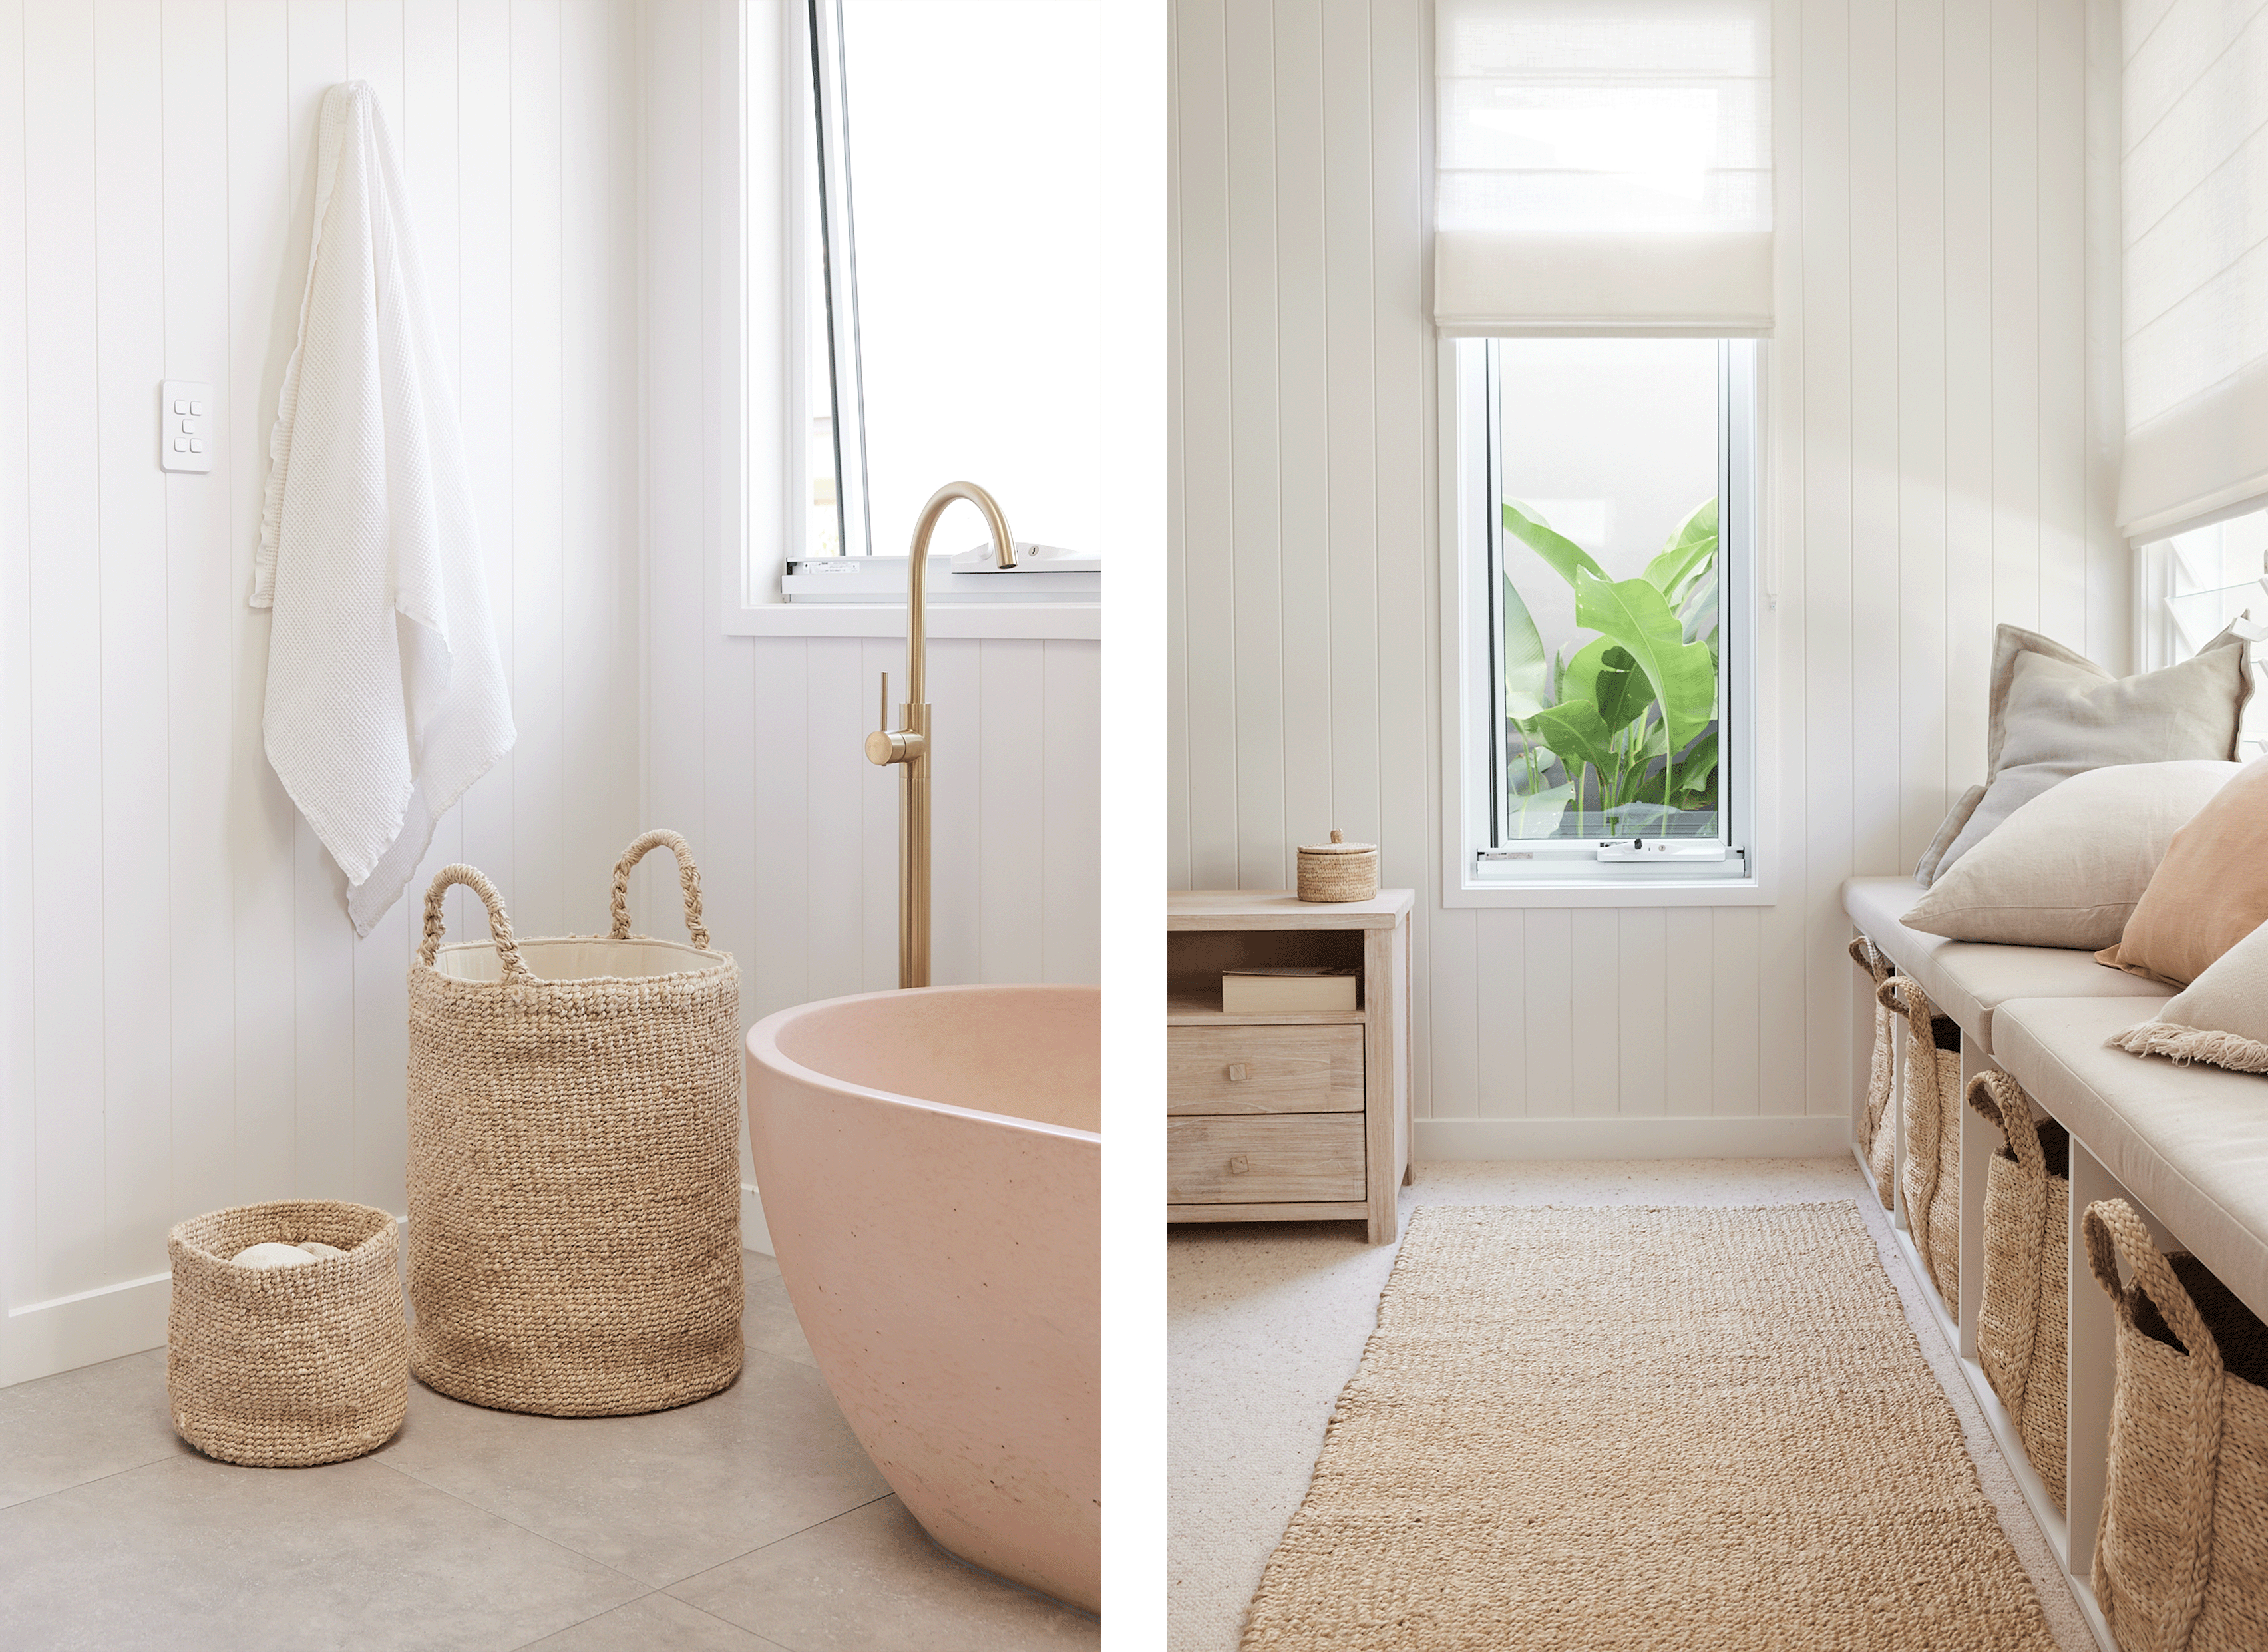 woven baskets in a bathroom and bedroom for storage at Sundream Burleigh Heads